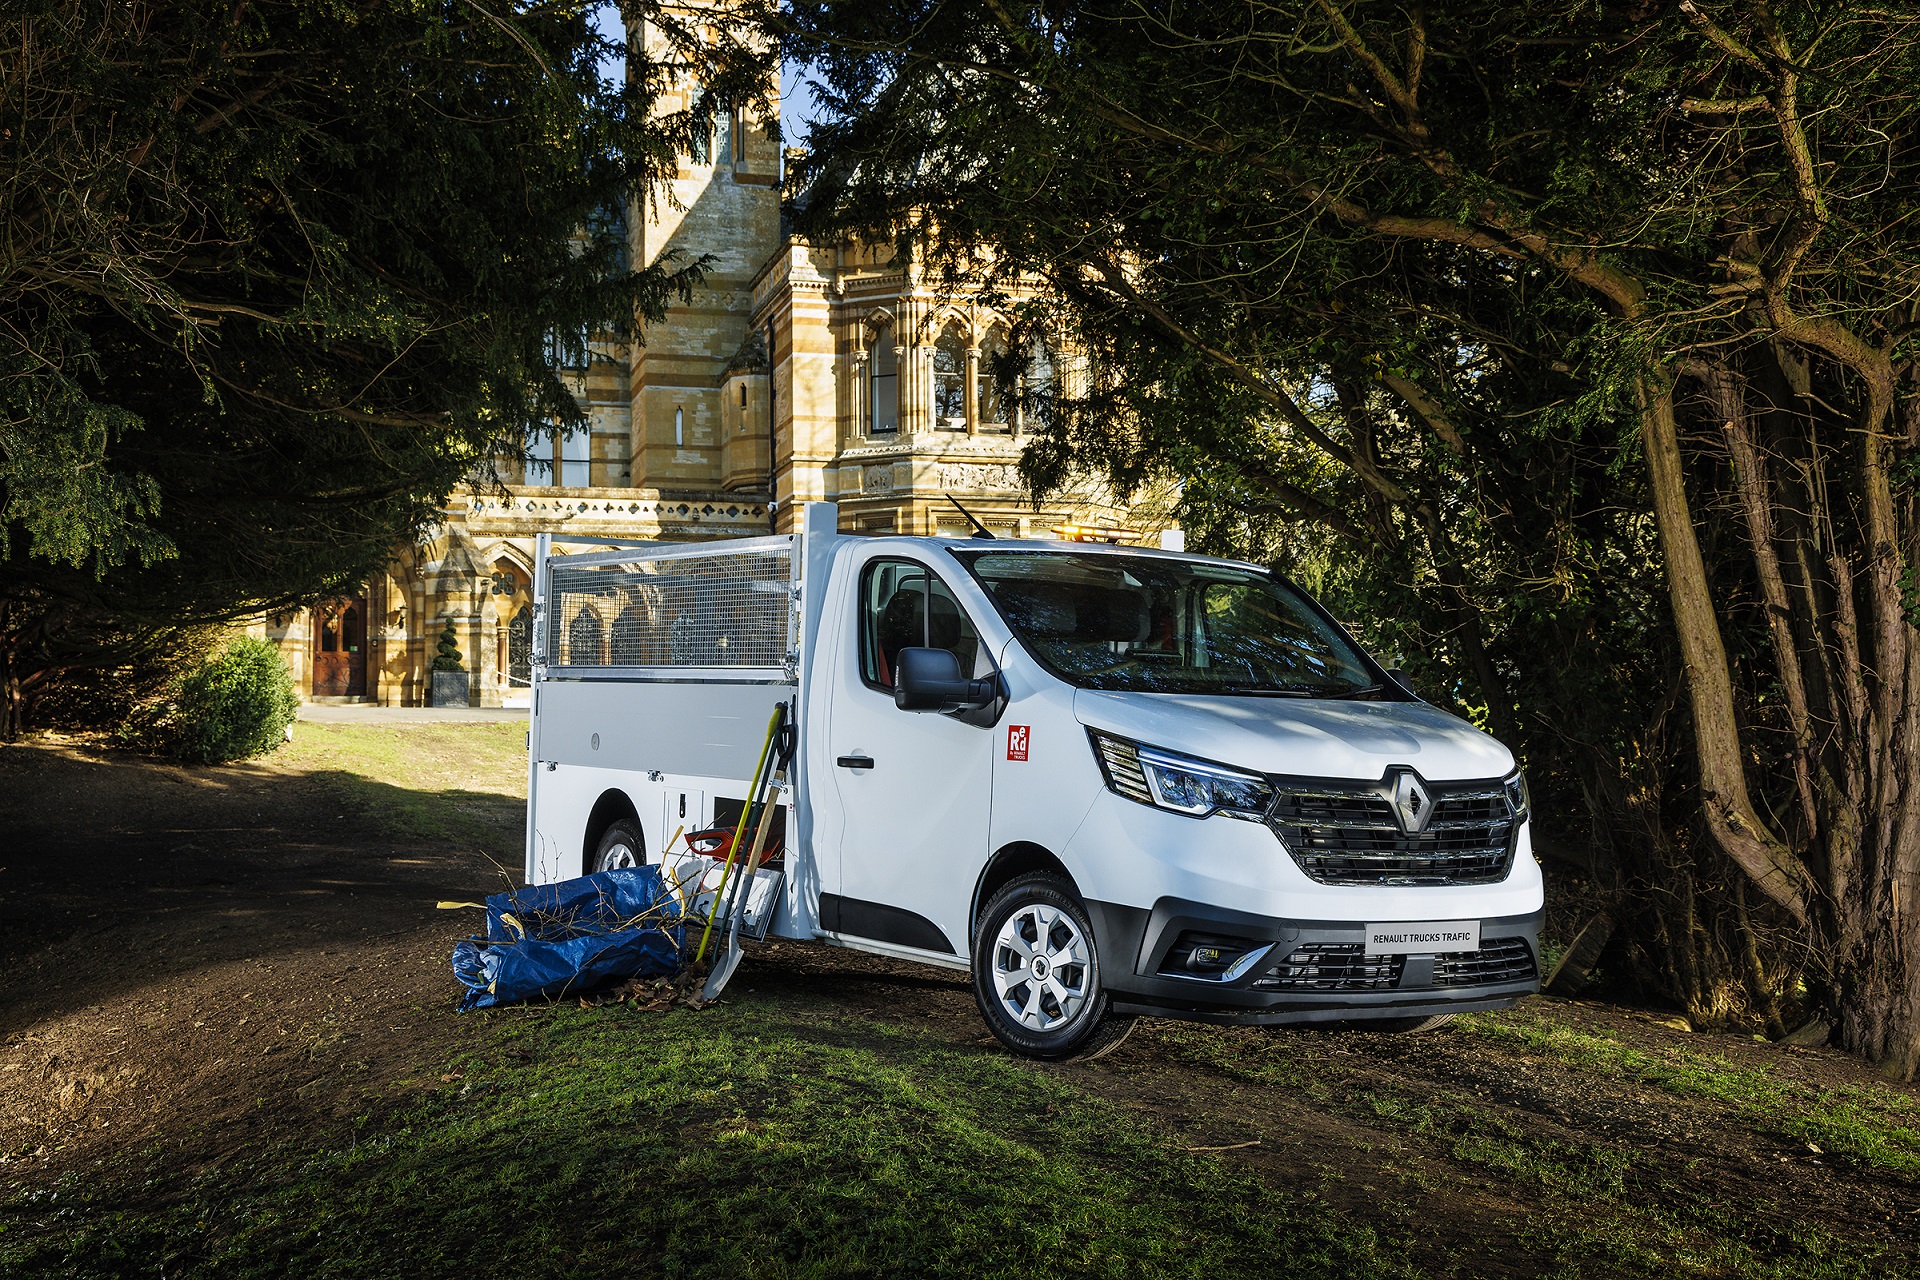 COMMERCIAL VEHICLES: RENAULT TRUCKS ANNOUNCES THE LAUNCH OF THE TRAFIC